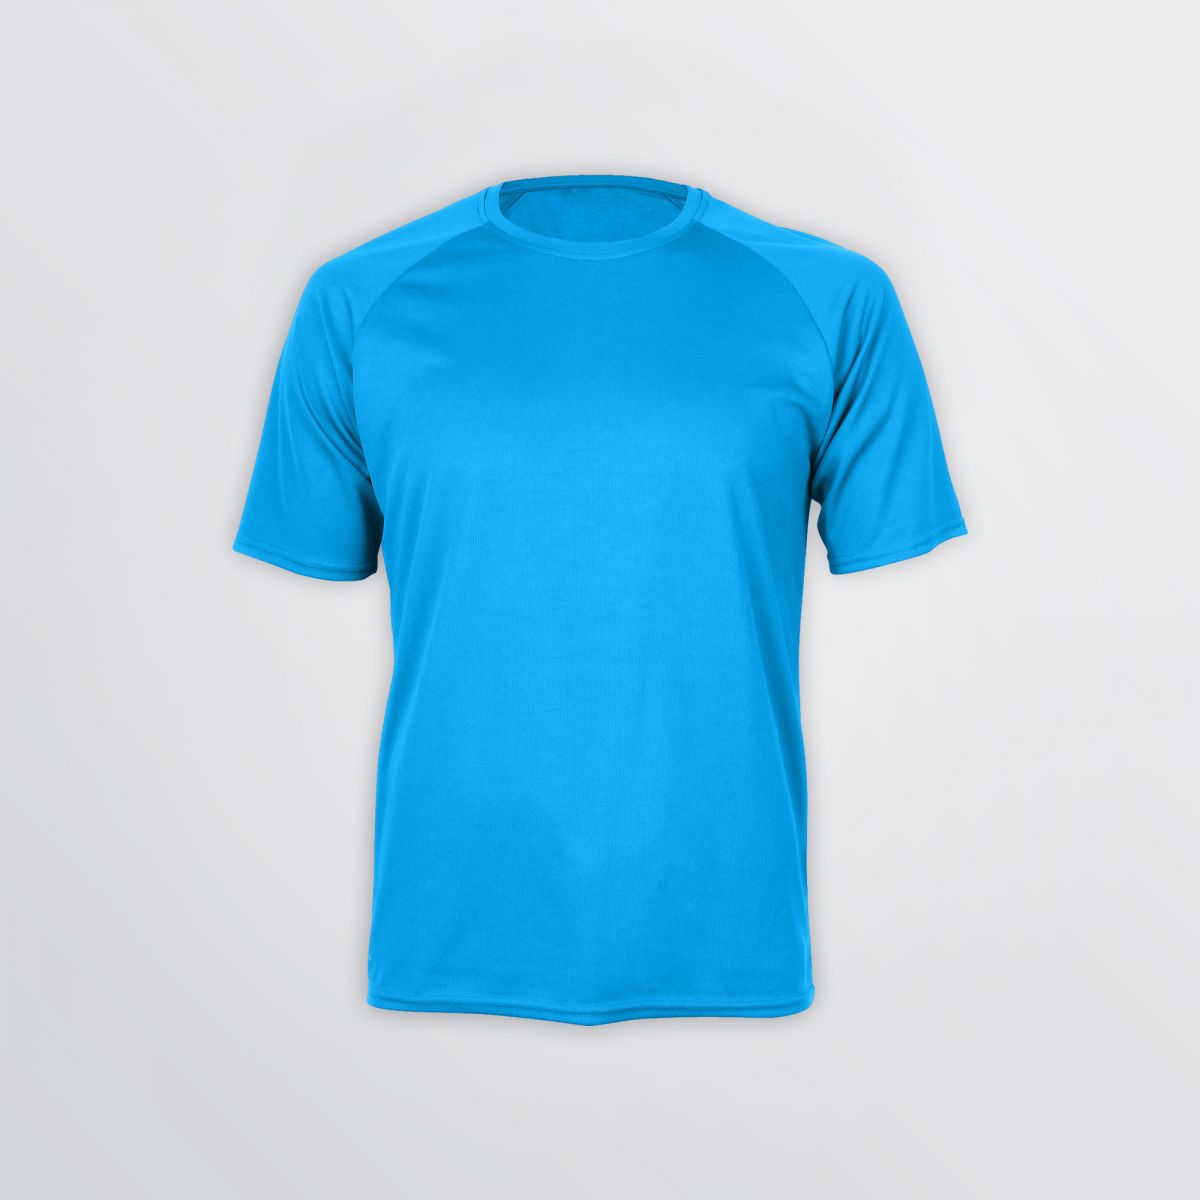 Customisable Basic Tech Shirt made of functional material as a product example in blue colour for men - front view